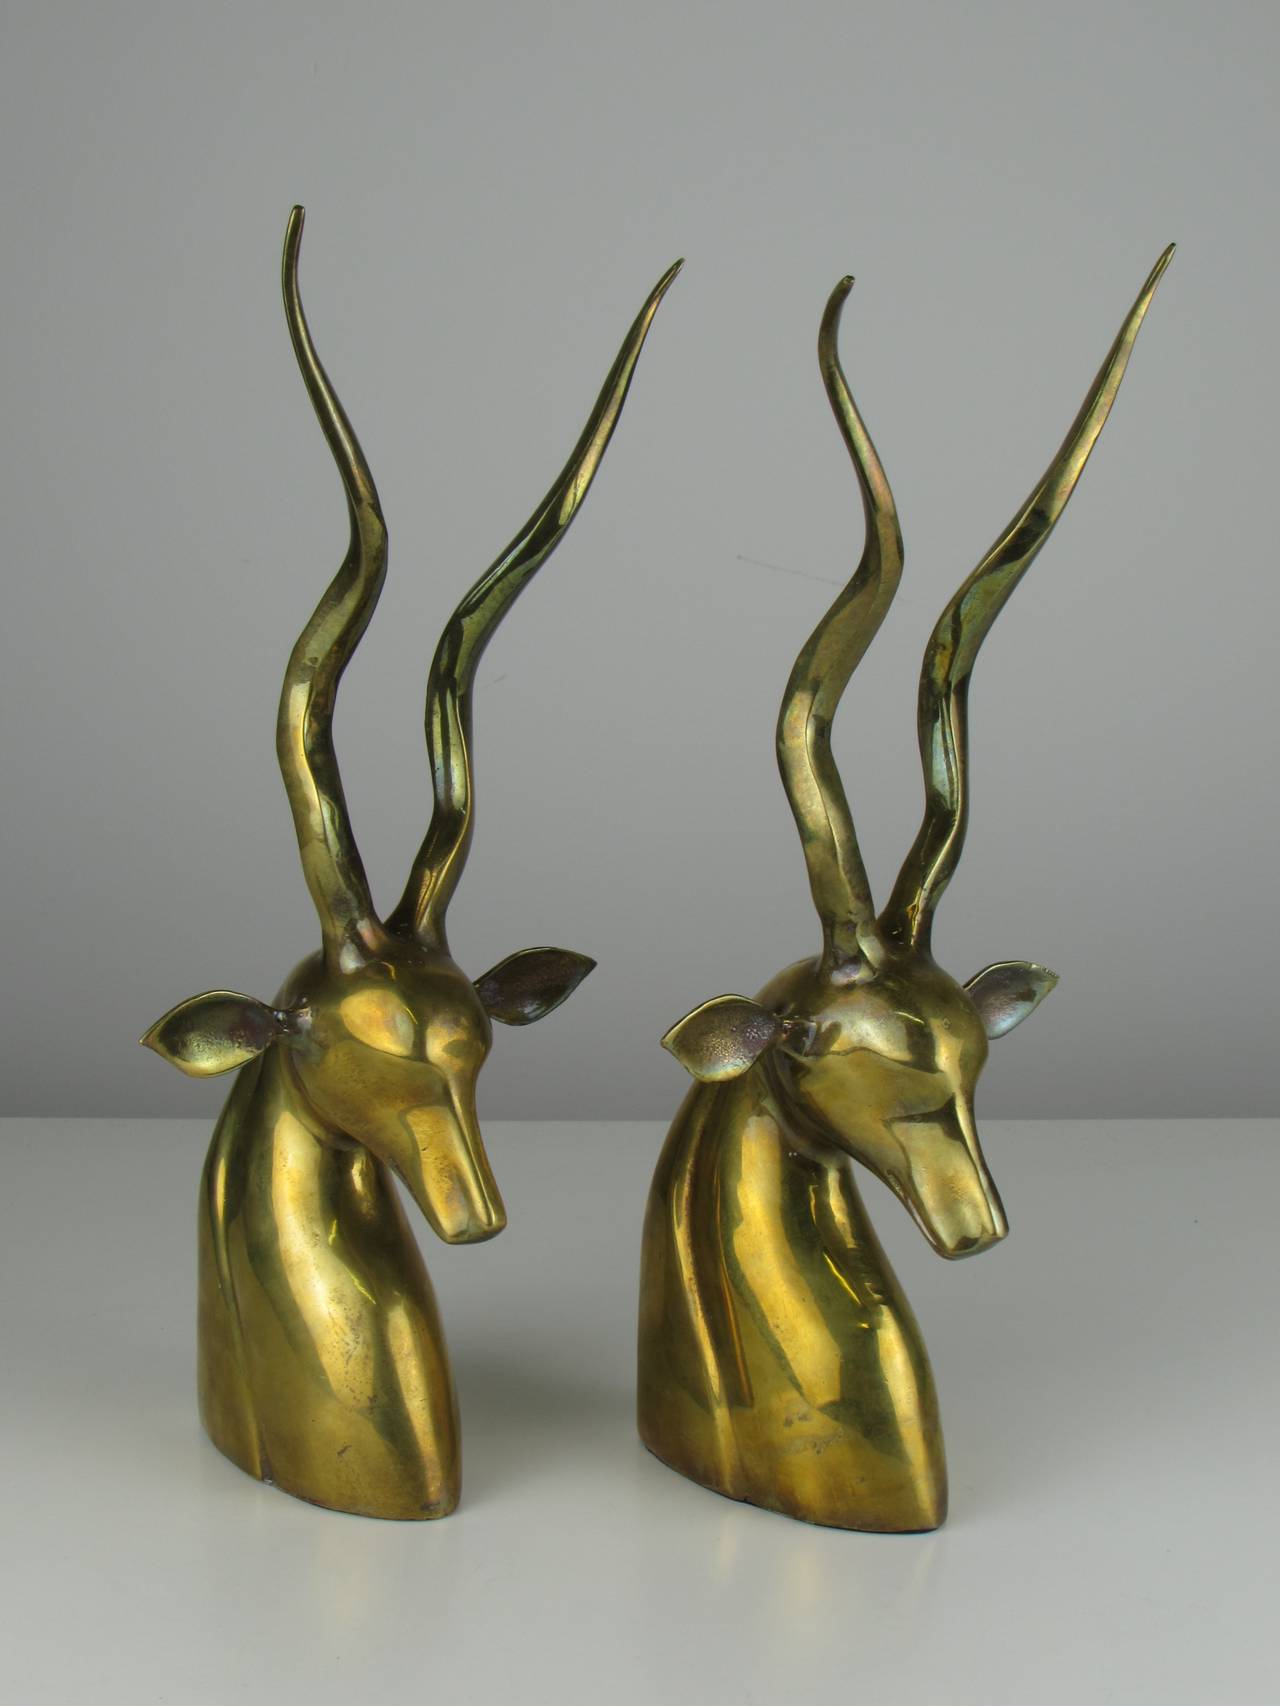 Fabulous large brass African kudu bookends in the style of Karl Springer, circa 1970. Beautiful tones of patina throughout. Overall excellent condition.